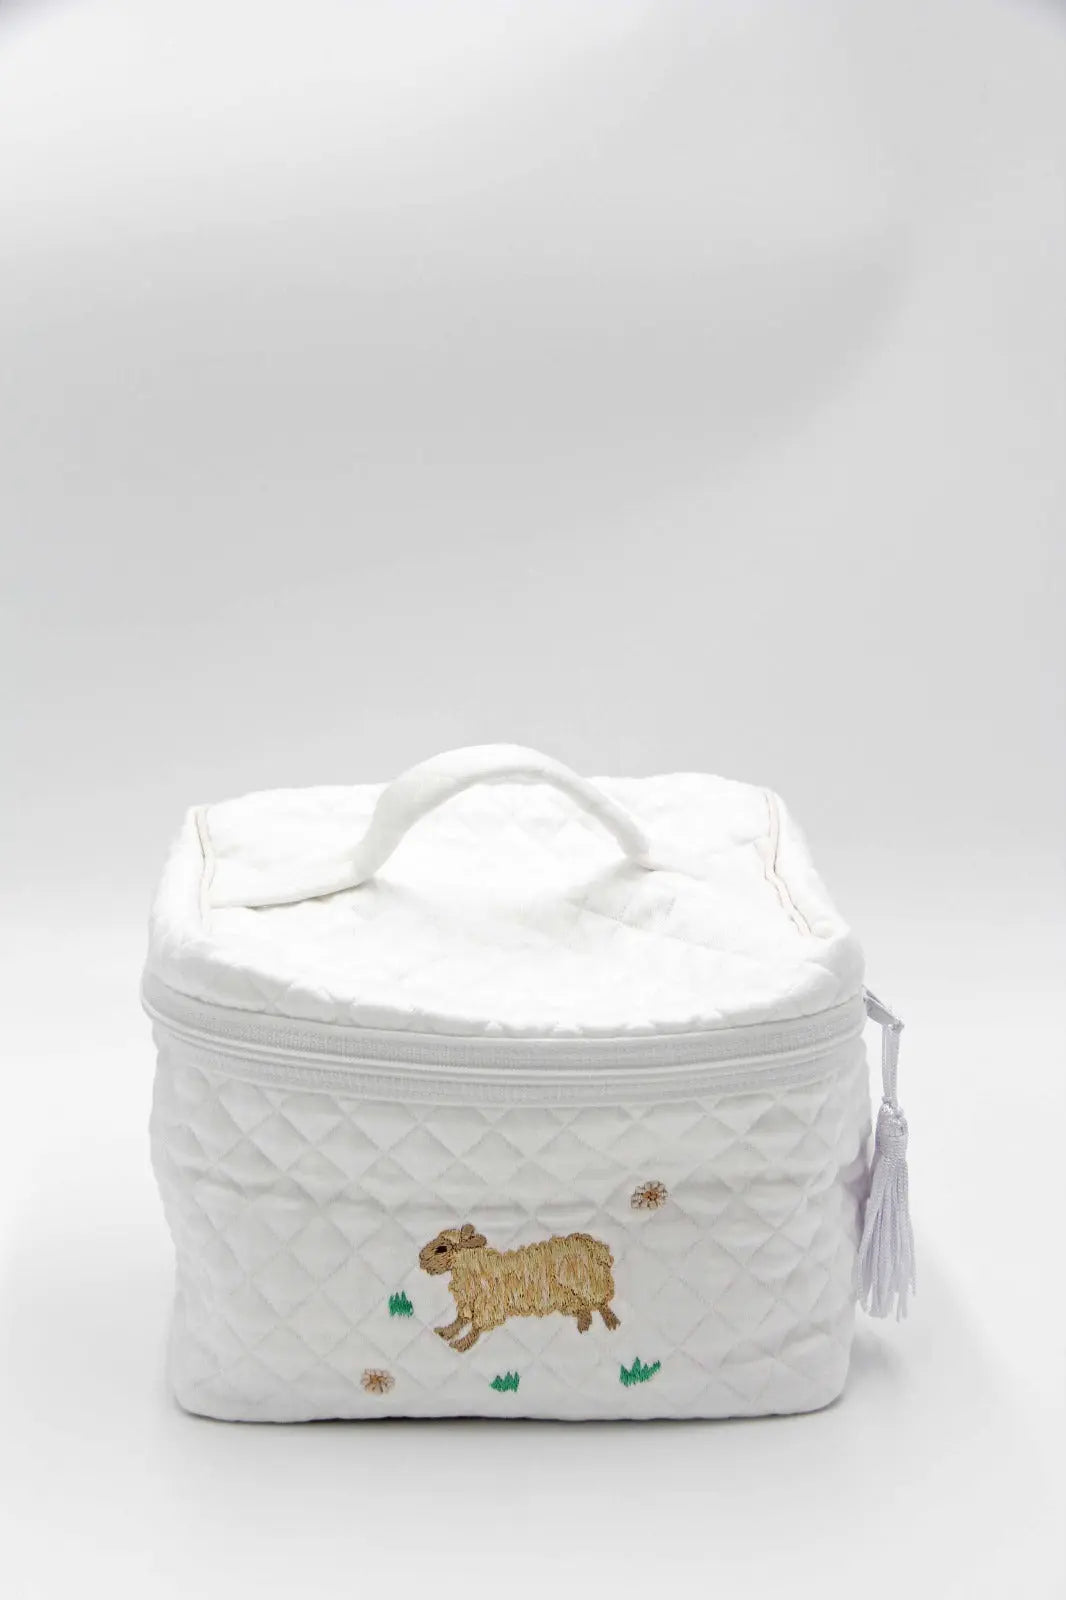 Vanity Case - Sheep-Toiletries & baby brushes-Valombrouse-Blue Almonds-London-South Kensington